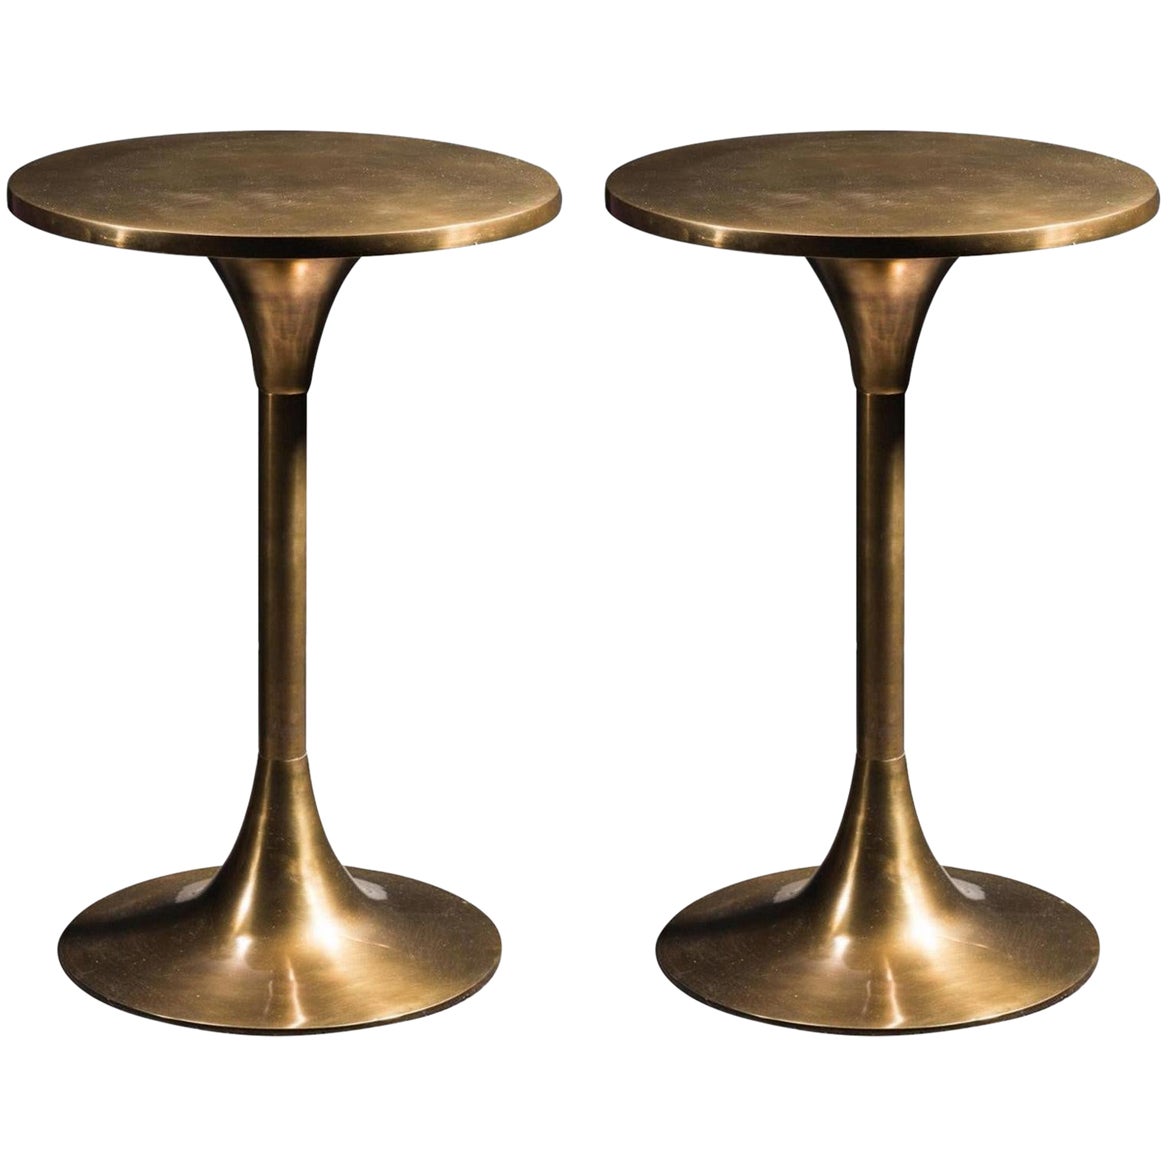 1960s Design Style Pair of Patina Brass Side Tables